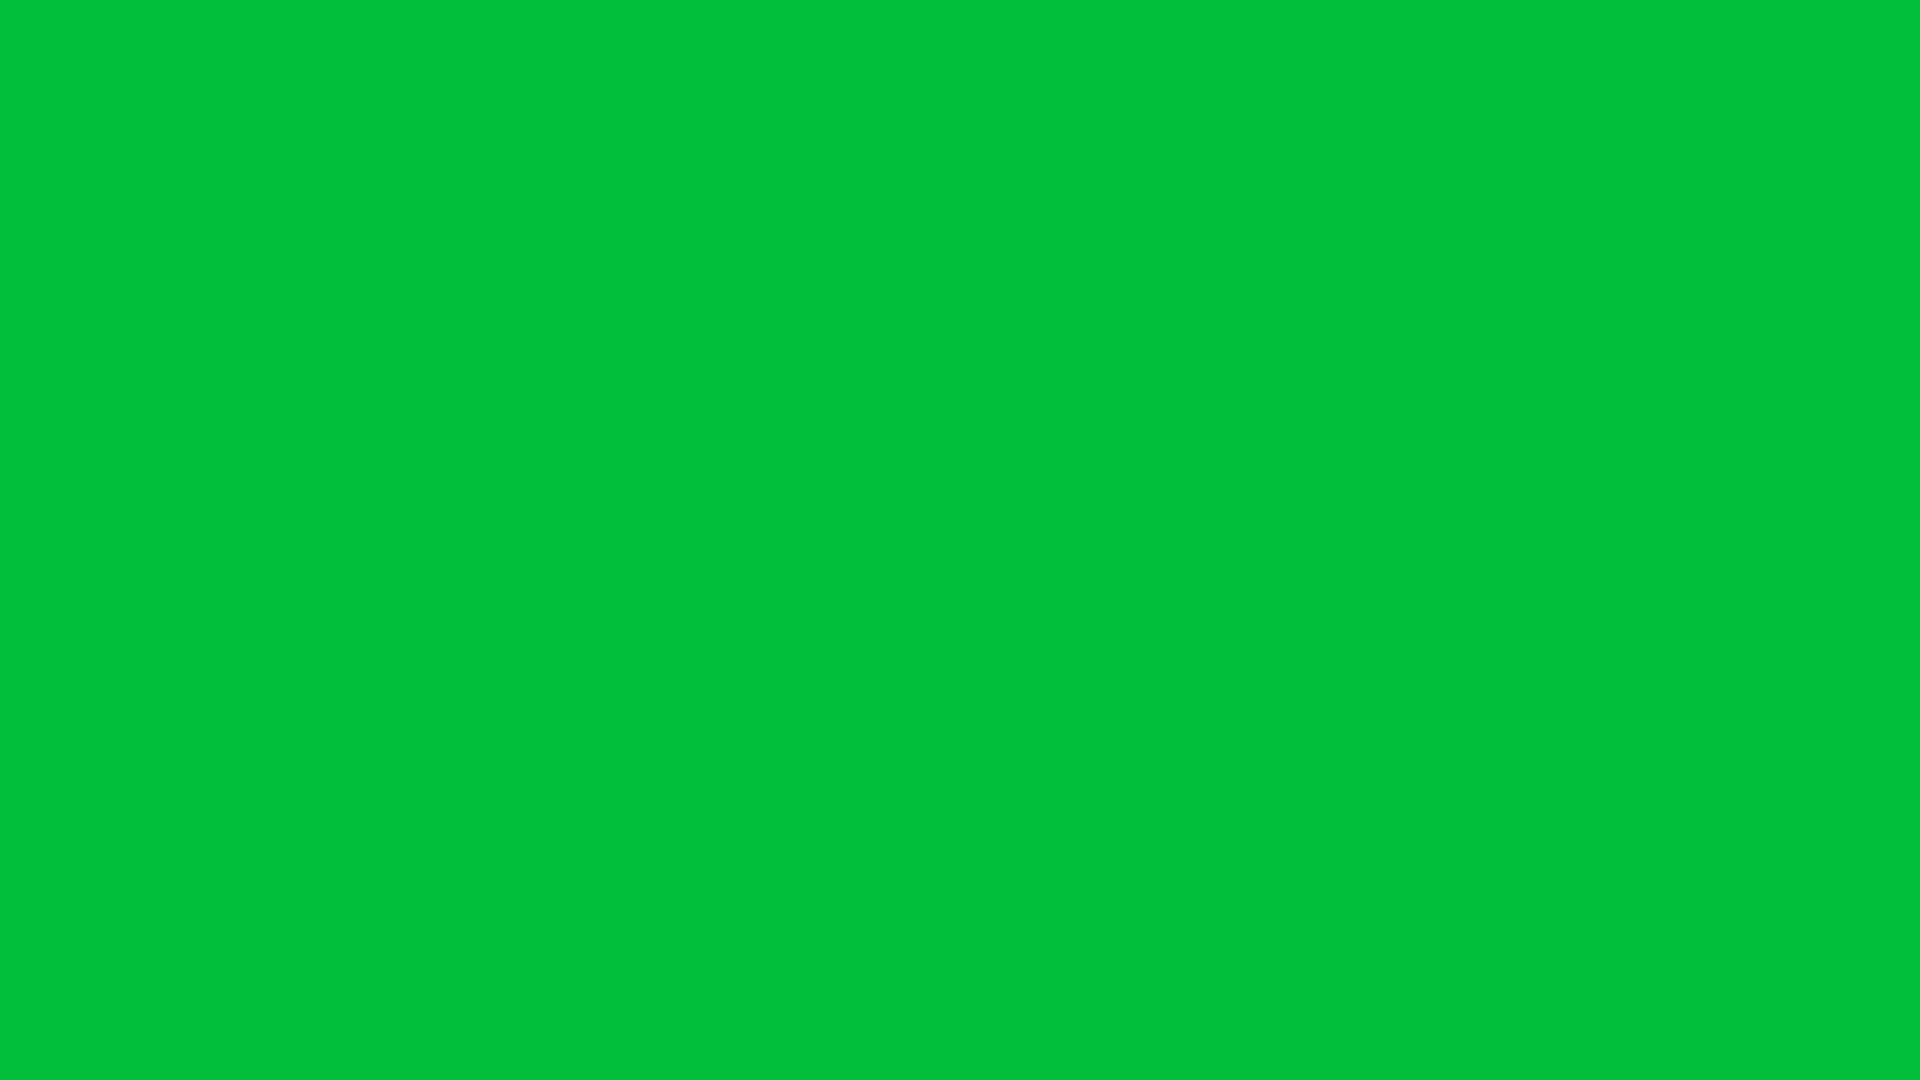 solid green background for zoom download